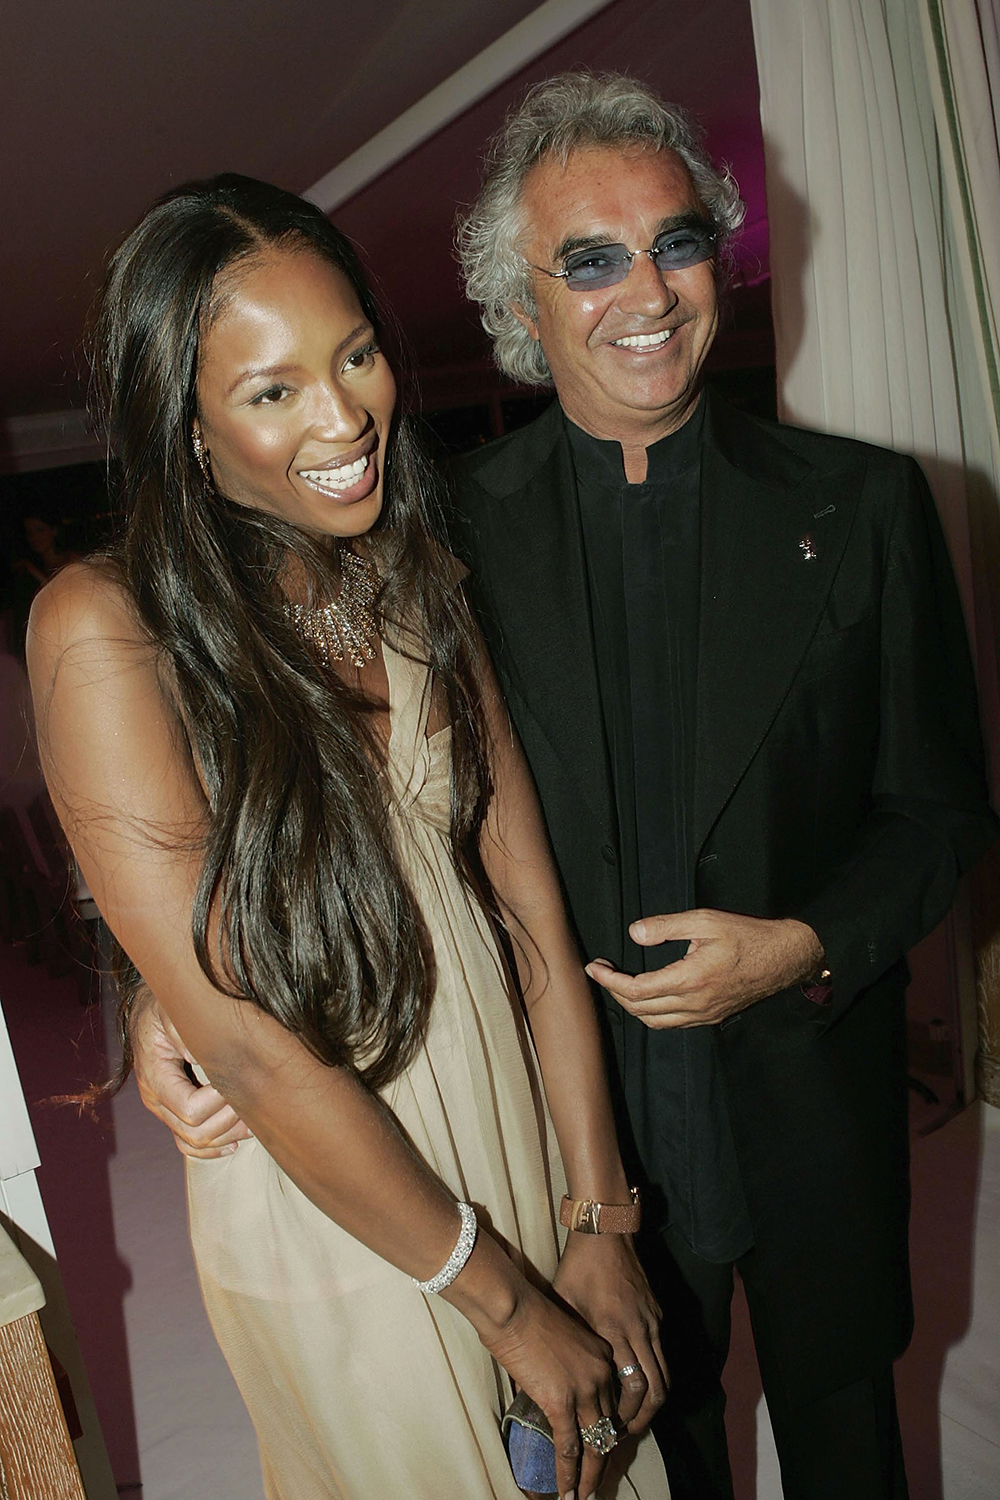 Naomi Campbell was once engaged to Formula One racing head Flavio Briatore in 1998. The couple had an an on-again relationship until their separation in 2003.